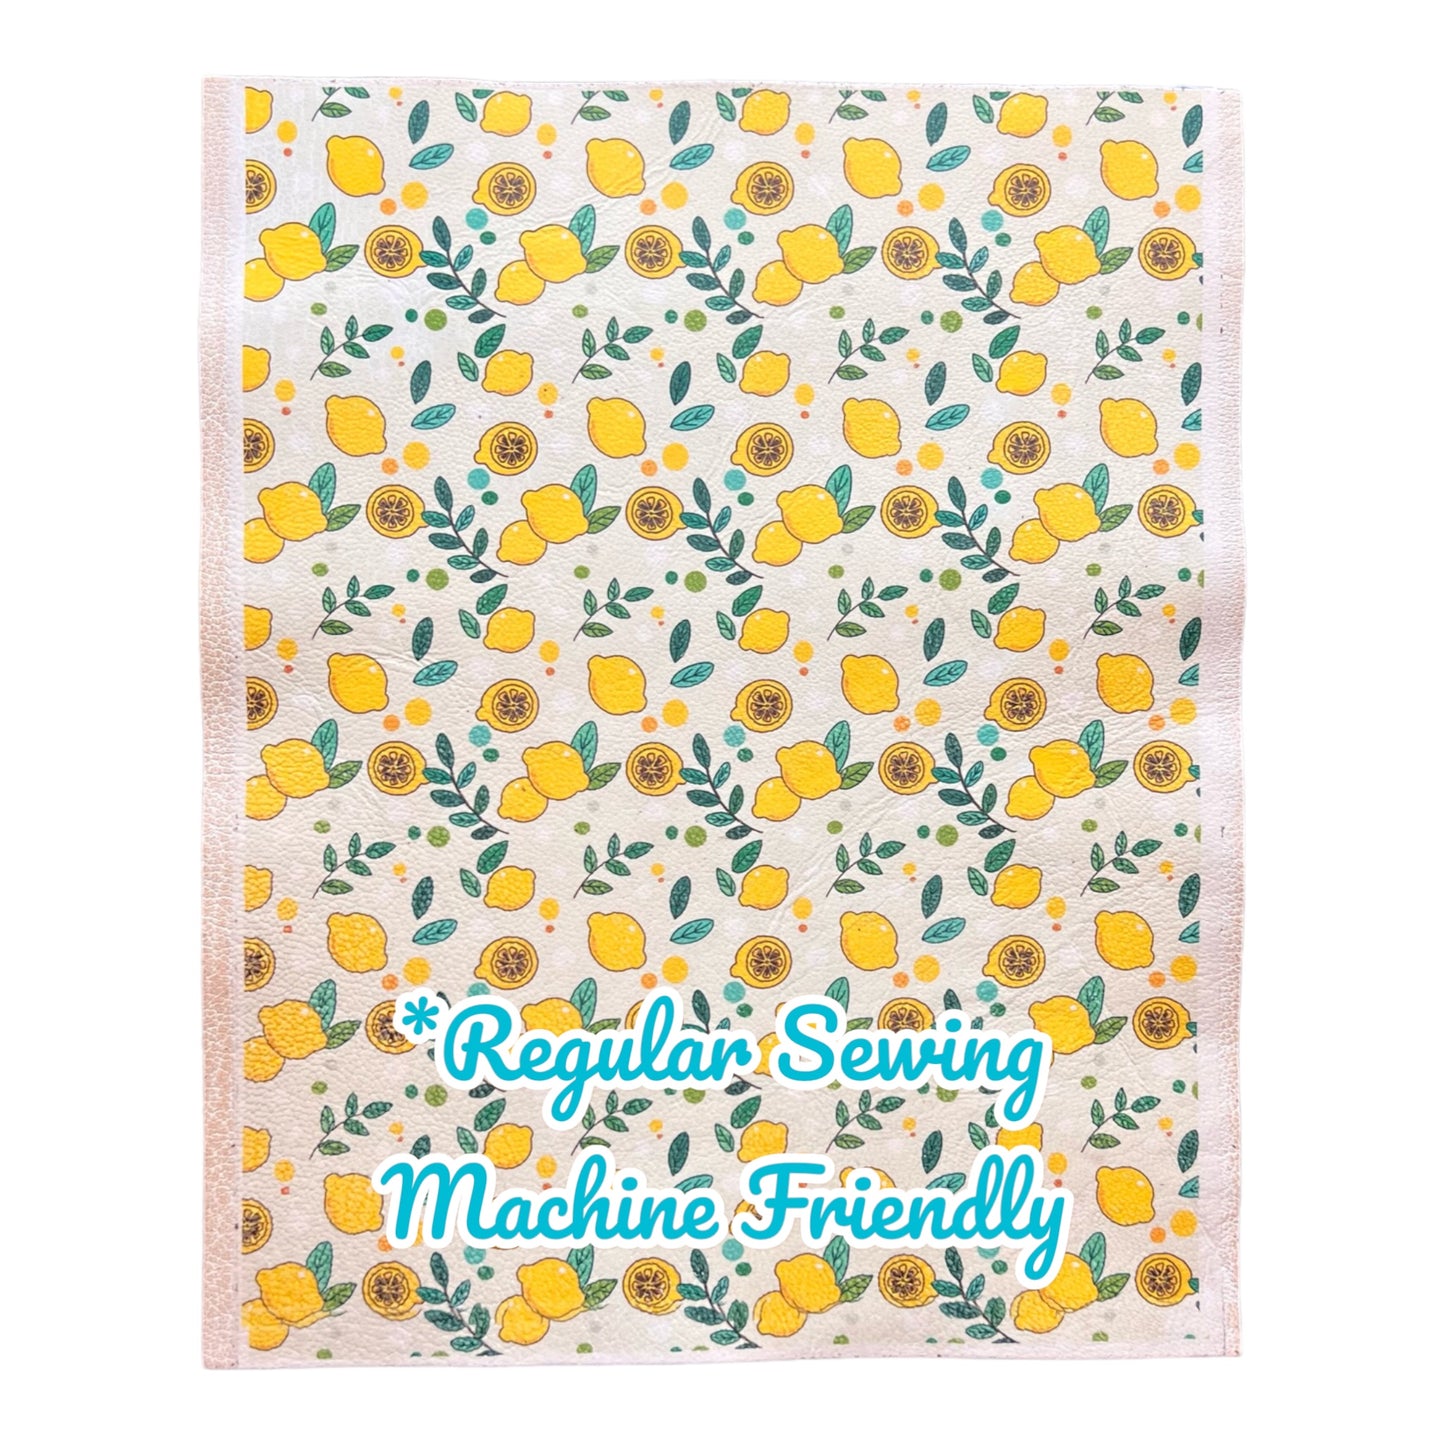 Lamb Lether Crafting Sheet in Luscious Lemon 8 1/2" By 11"